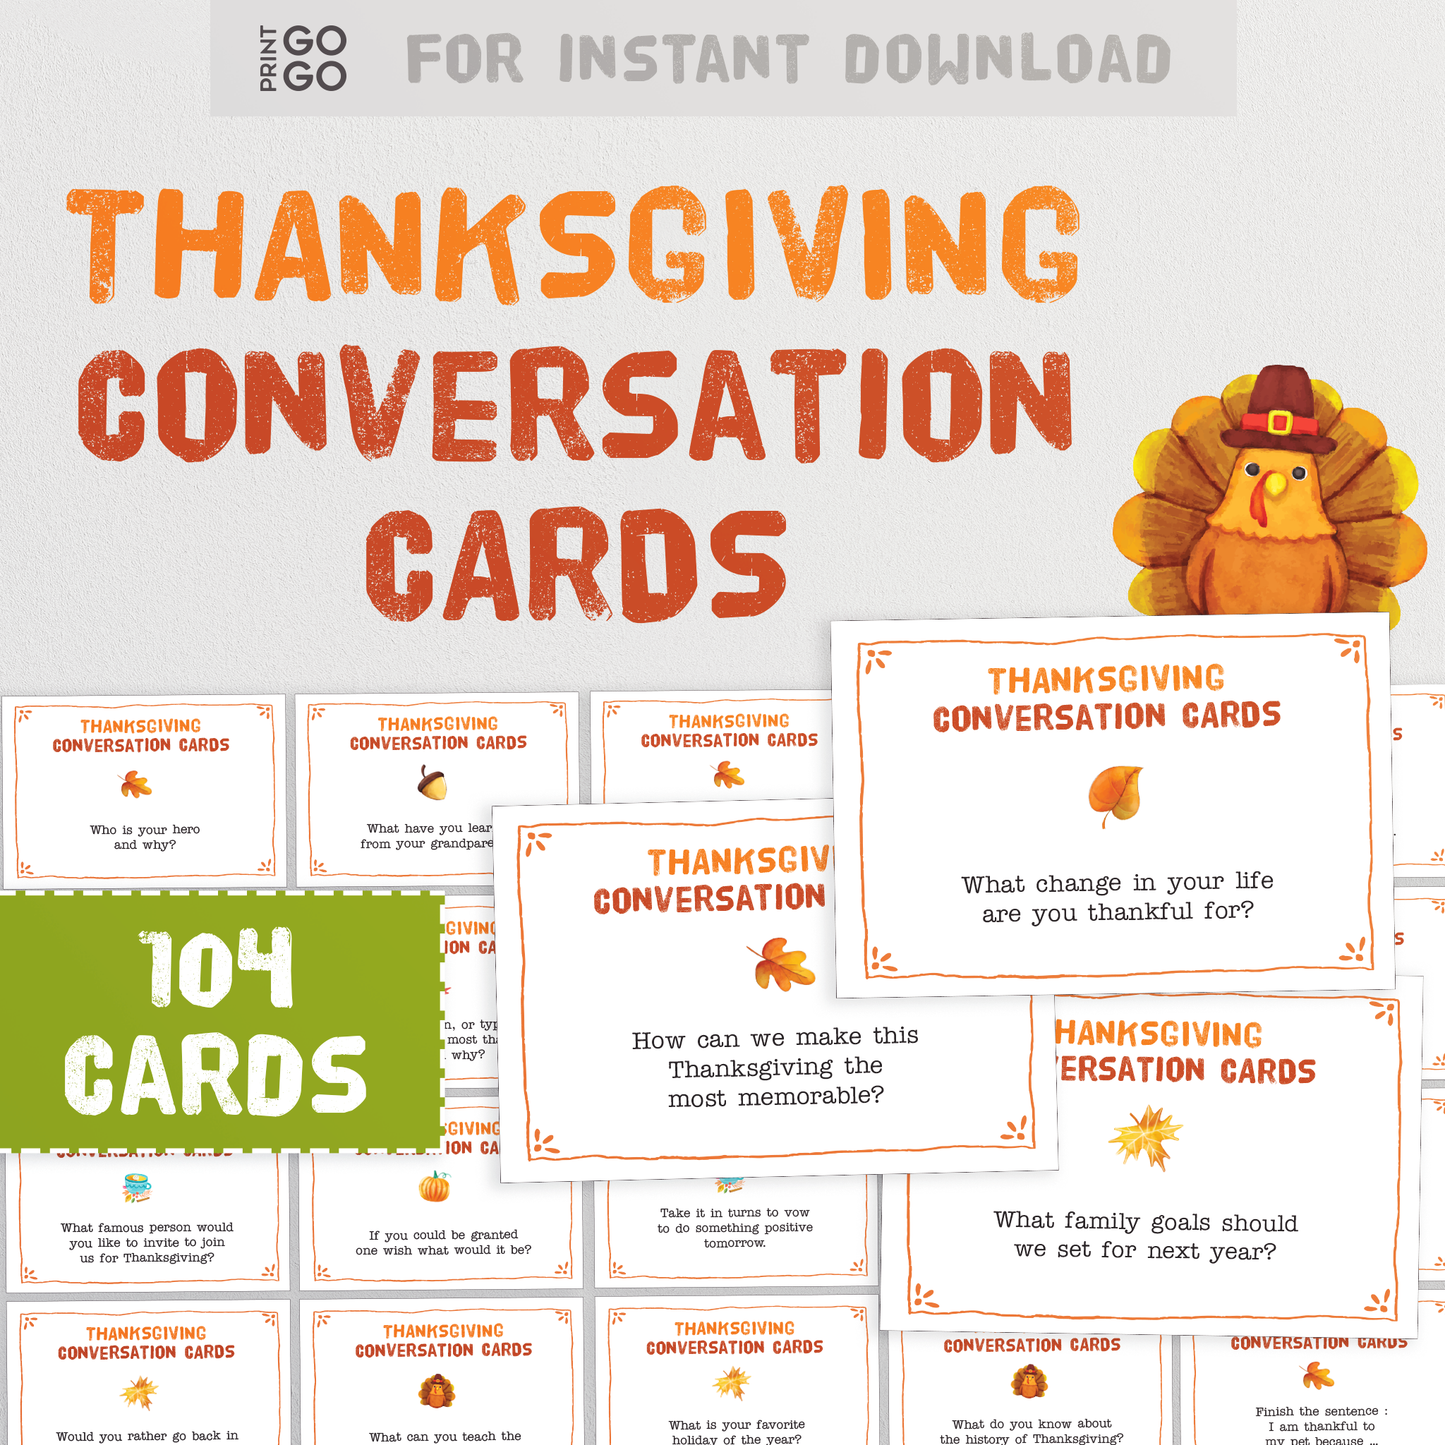 Thanksgiving Conversation Cards - The Fun and Meaningful Activity of Getting Your Family to Open Up